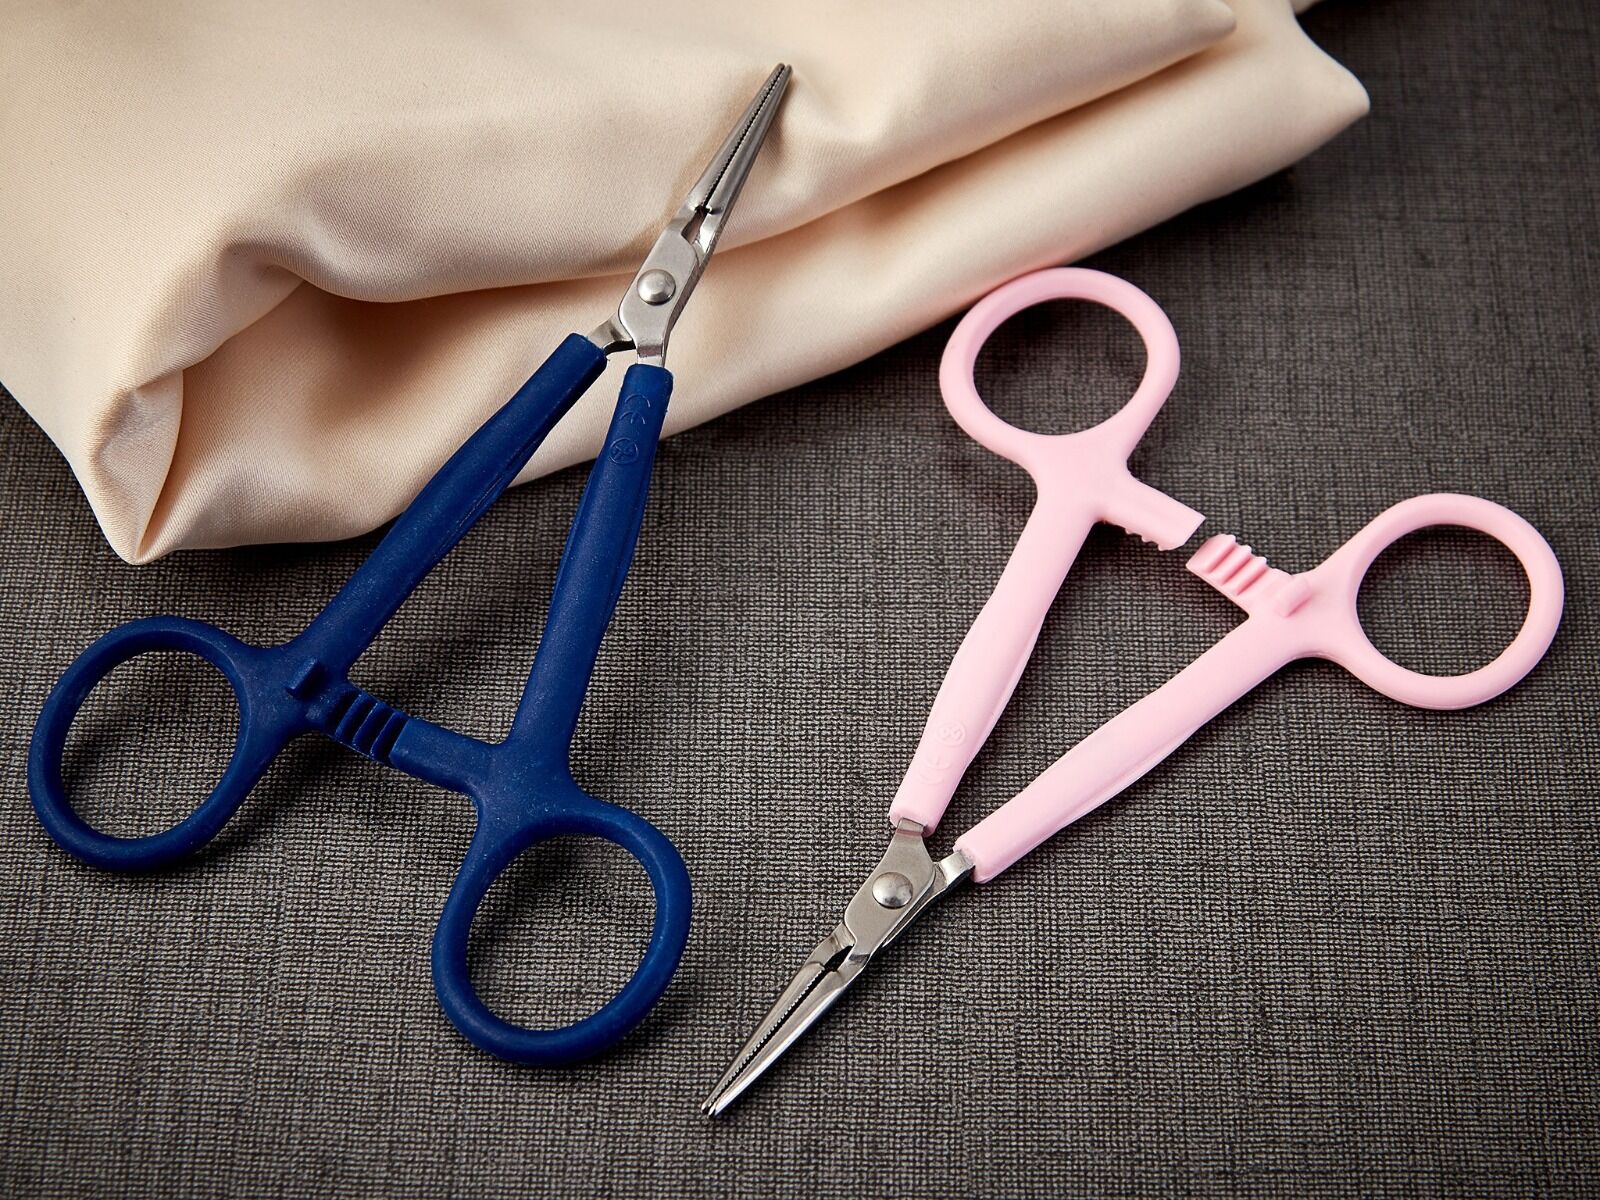 Easy Grip Pliers – Quality Sewing & Vacuum